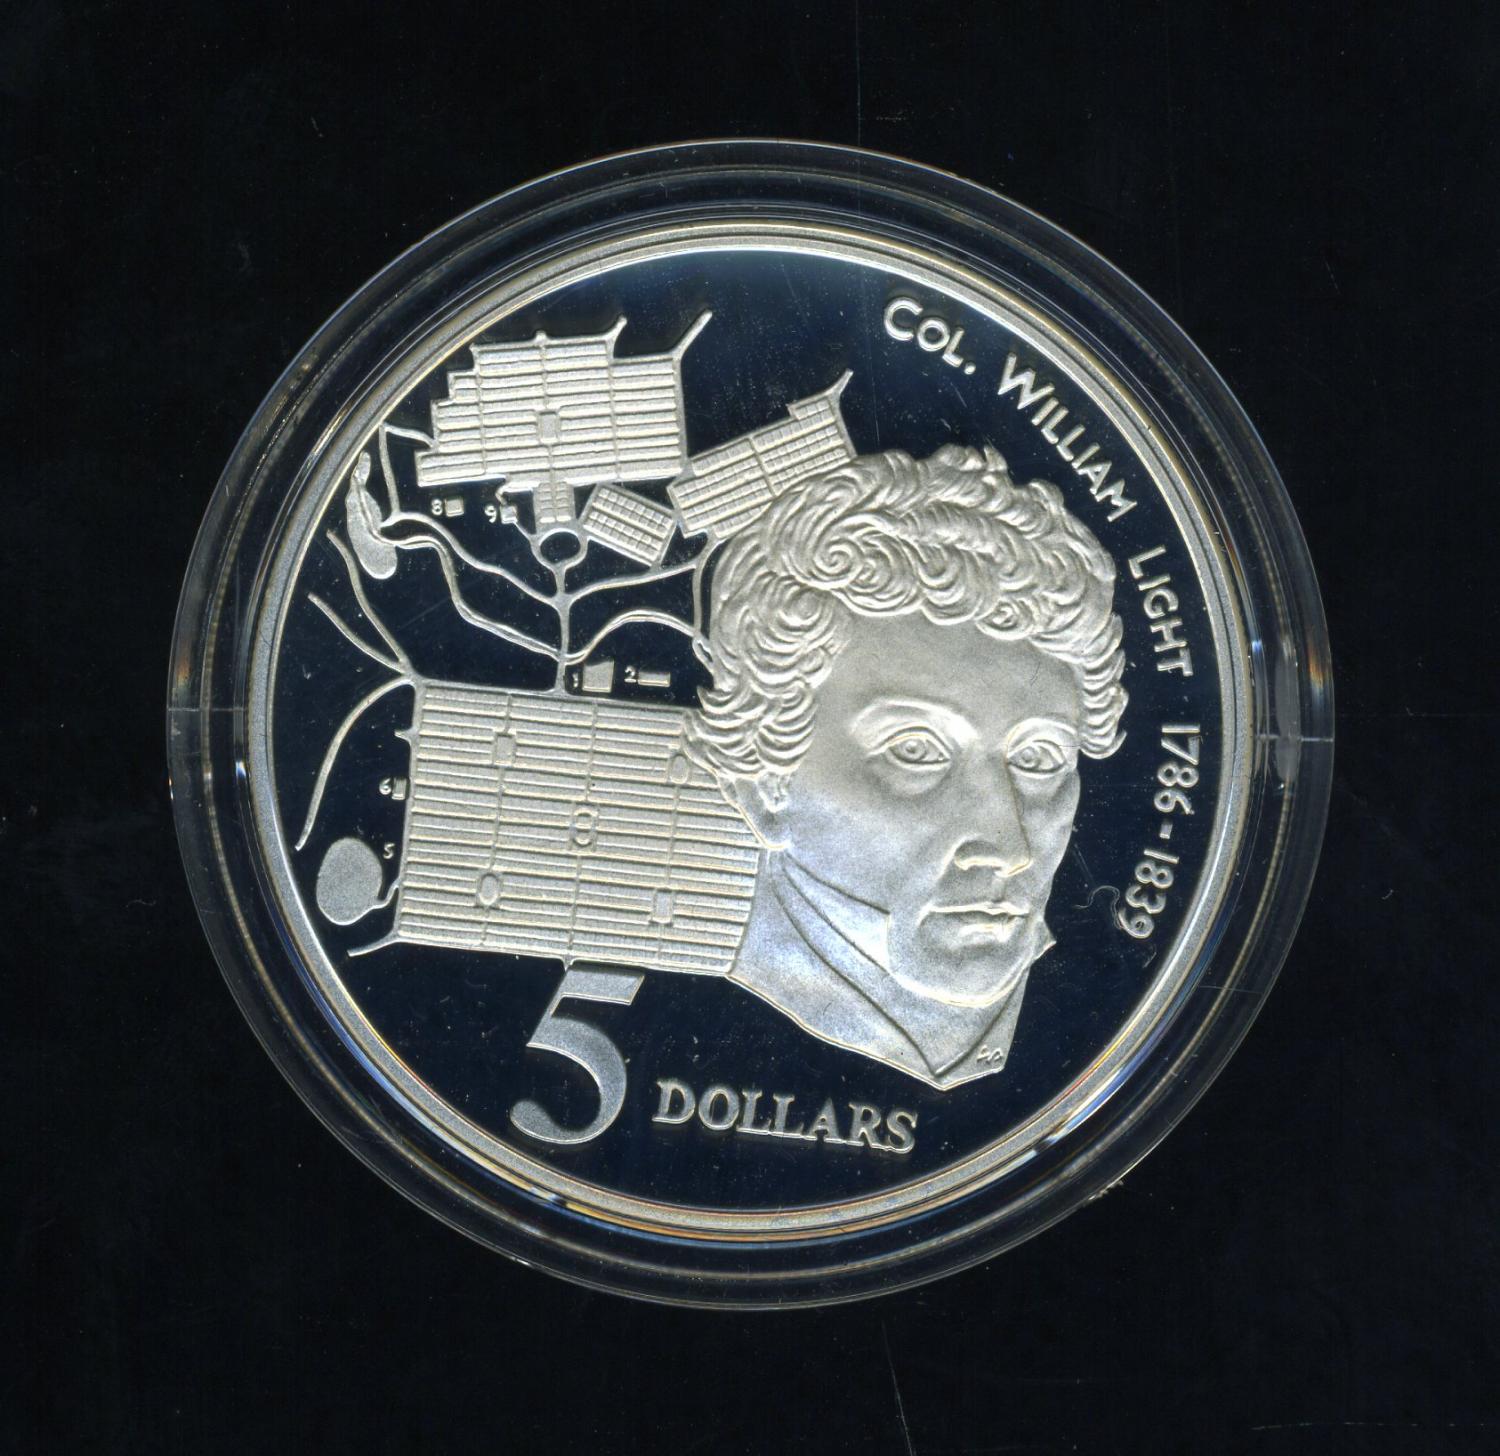 Thumbnail for 1995 $5.00 Silver Proof Coin in Capsule from Masterpieces in Silver Set - Col. William Light